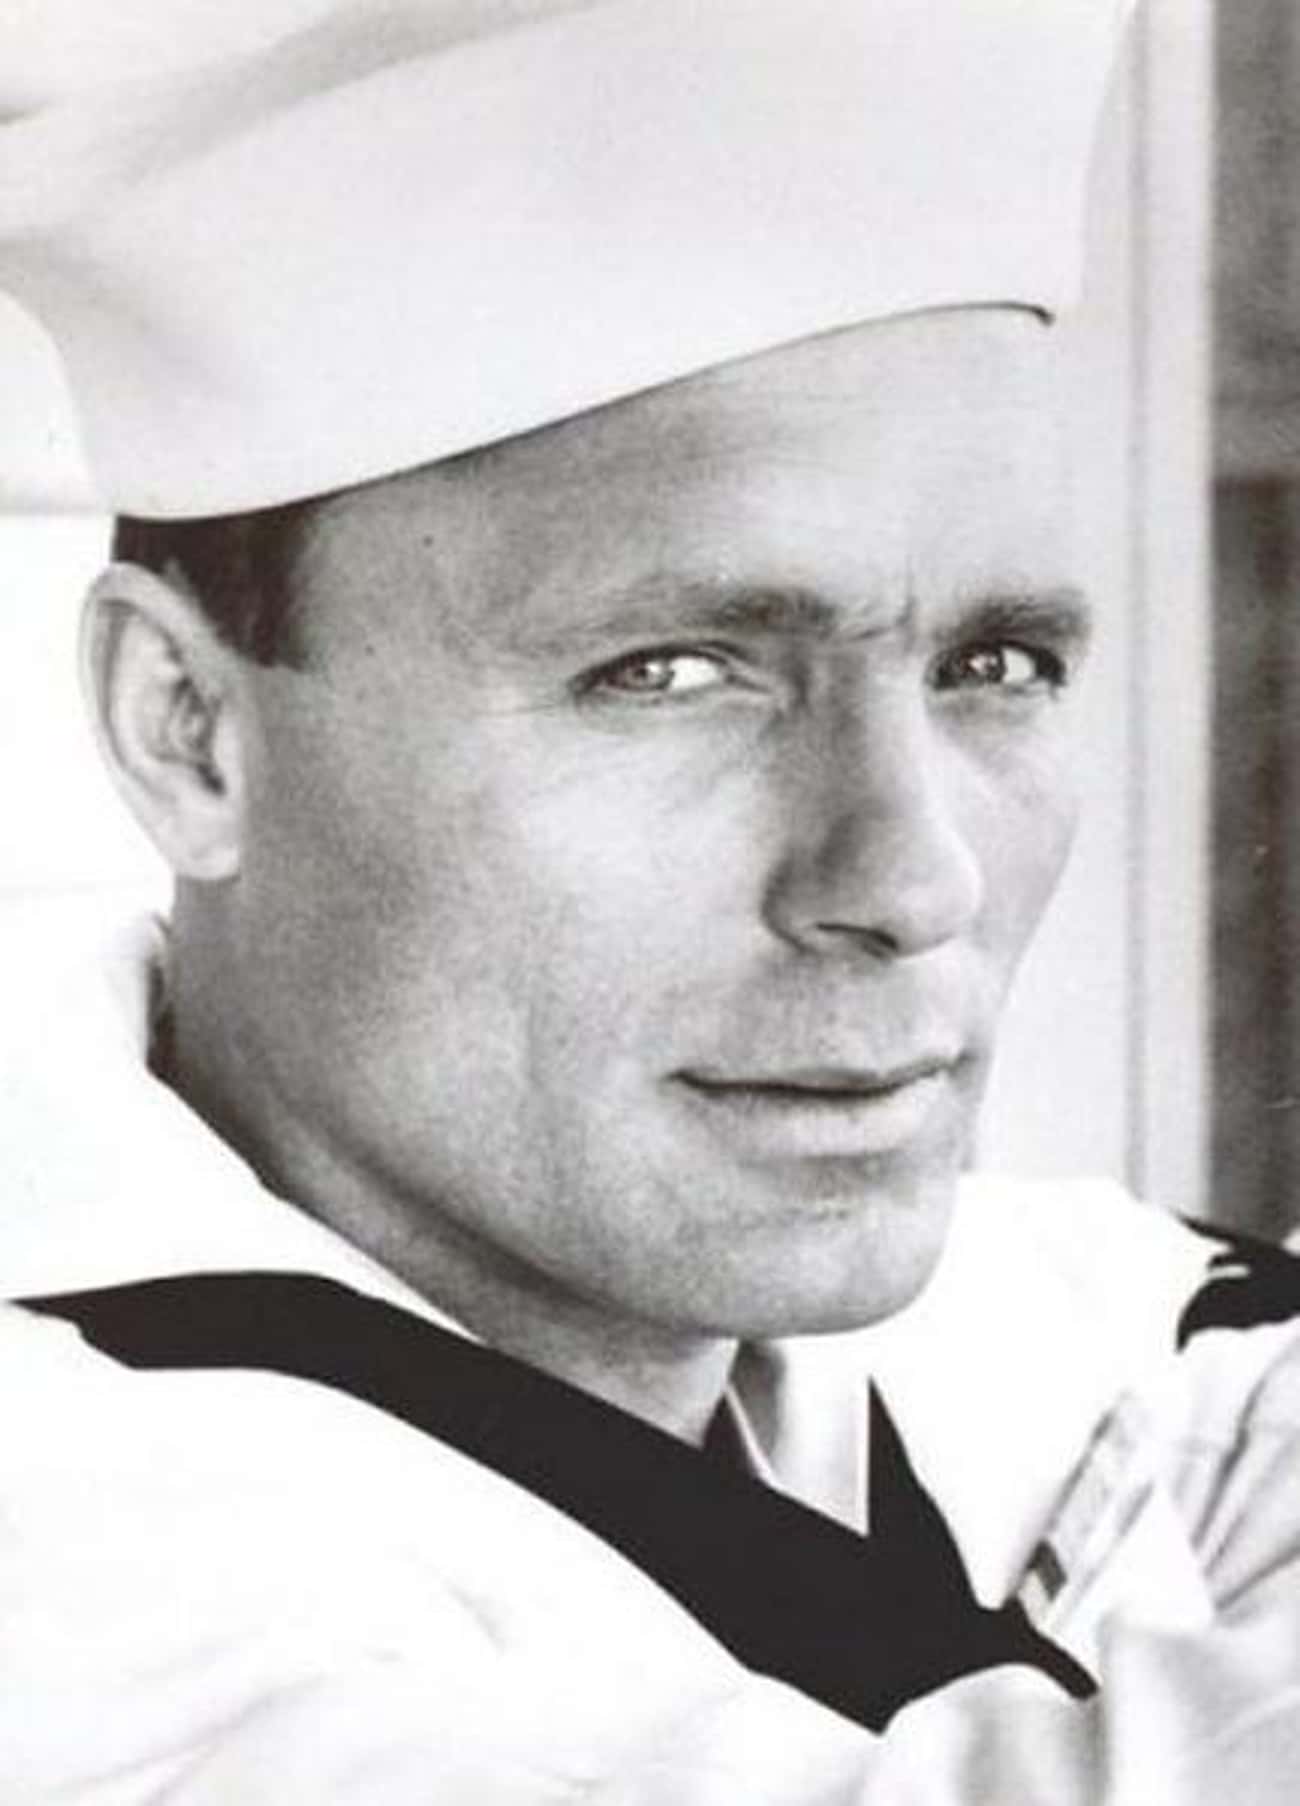 Young Ed Harris in Sailor Outfit